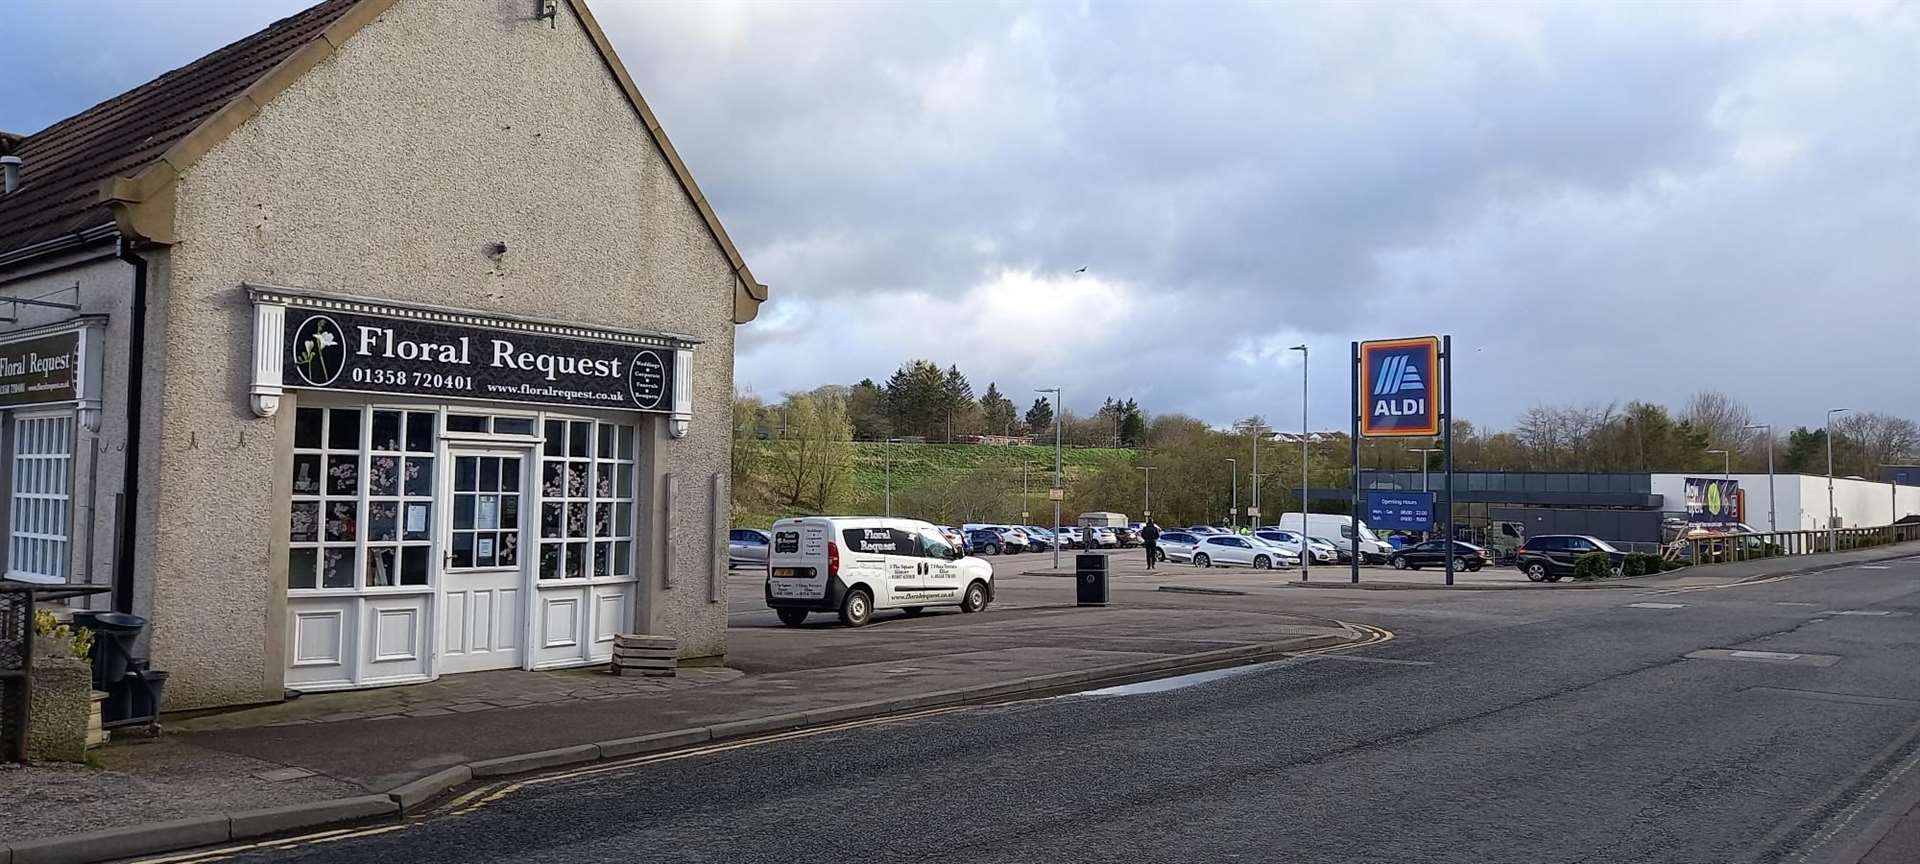 The food truck will be located at the corner of the carpark at Aldi in Ellon